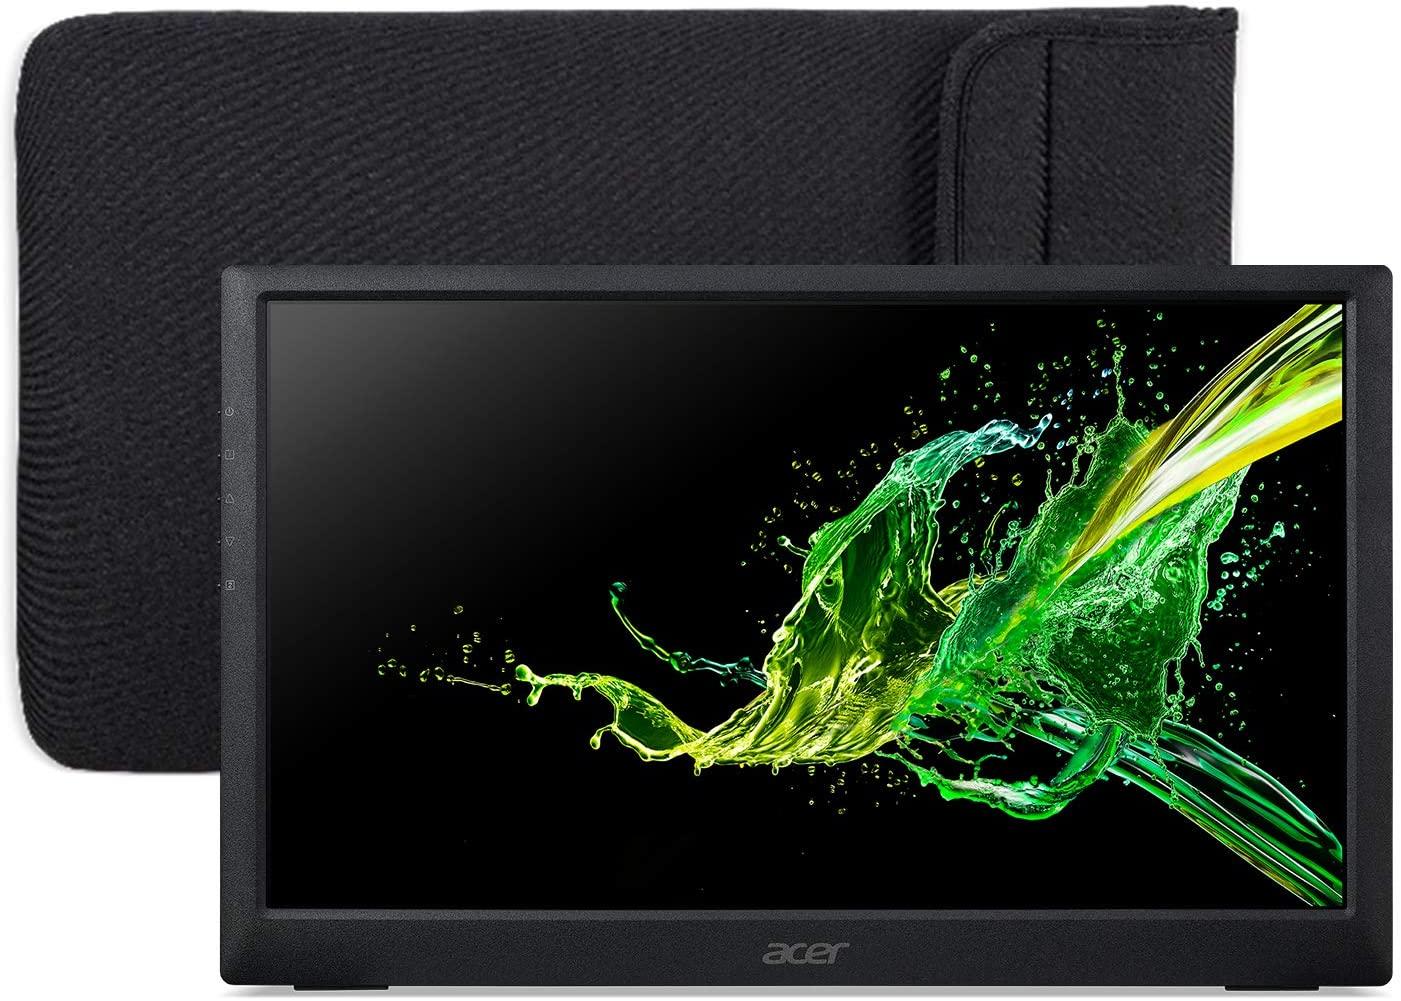 15.6in Acer PM161Q BU Portable Monitor for $129.99 Shipped